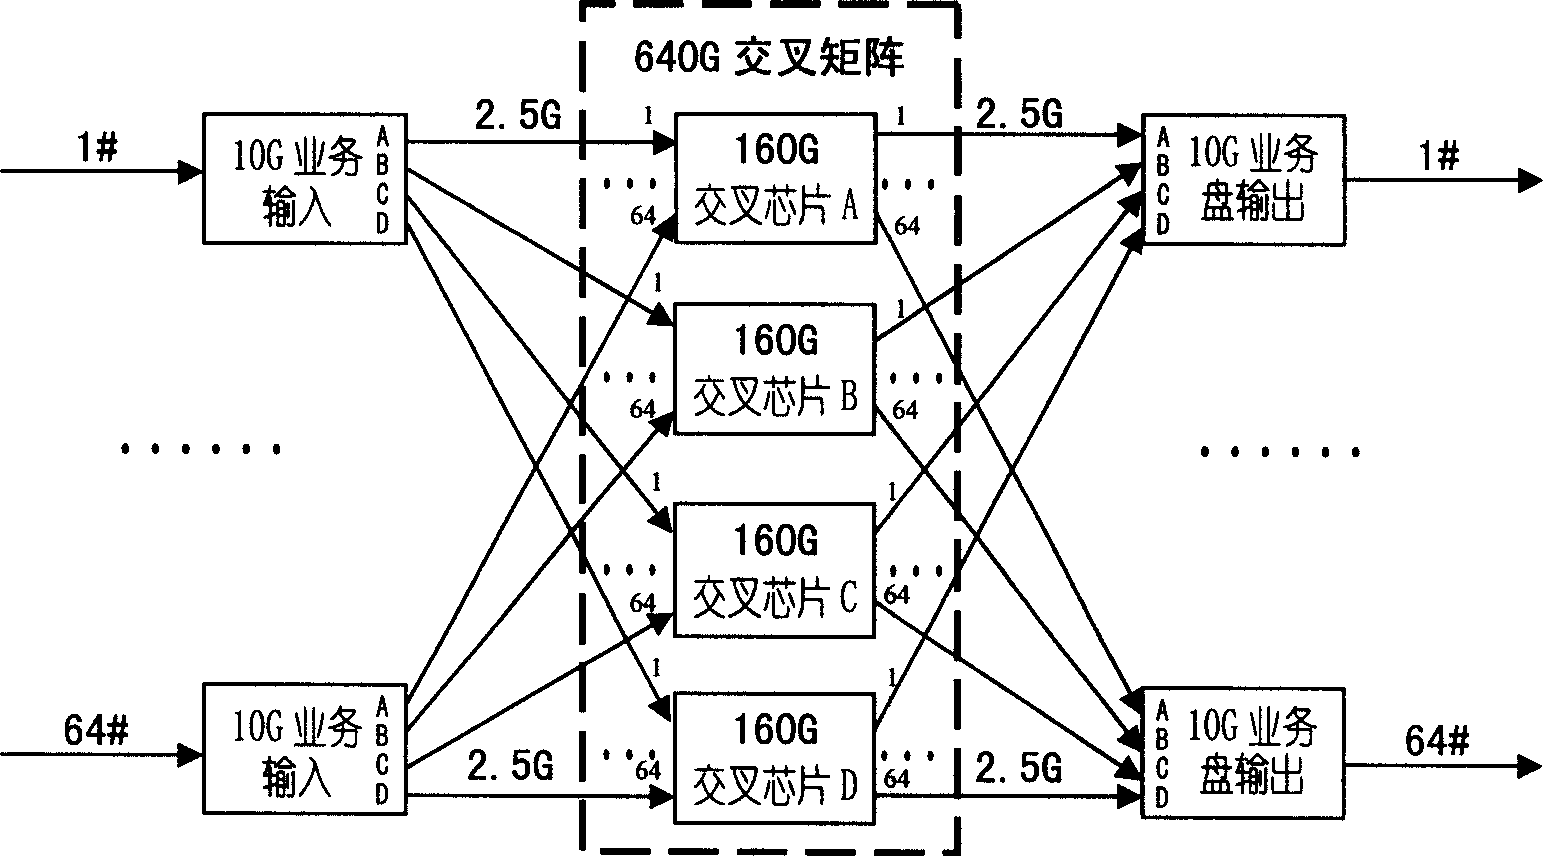 Large-capacity multicast strict blocking-free cross array structure